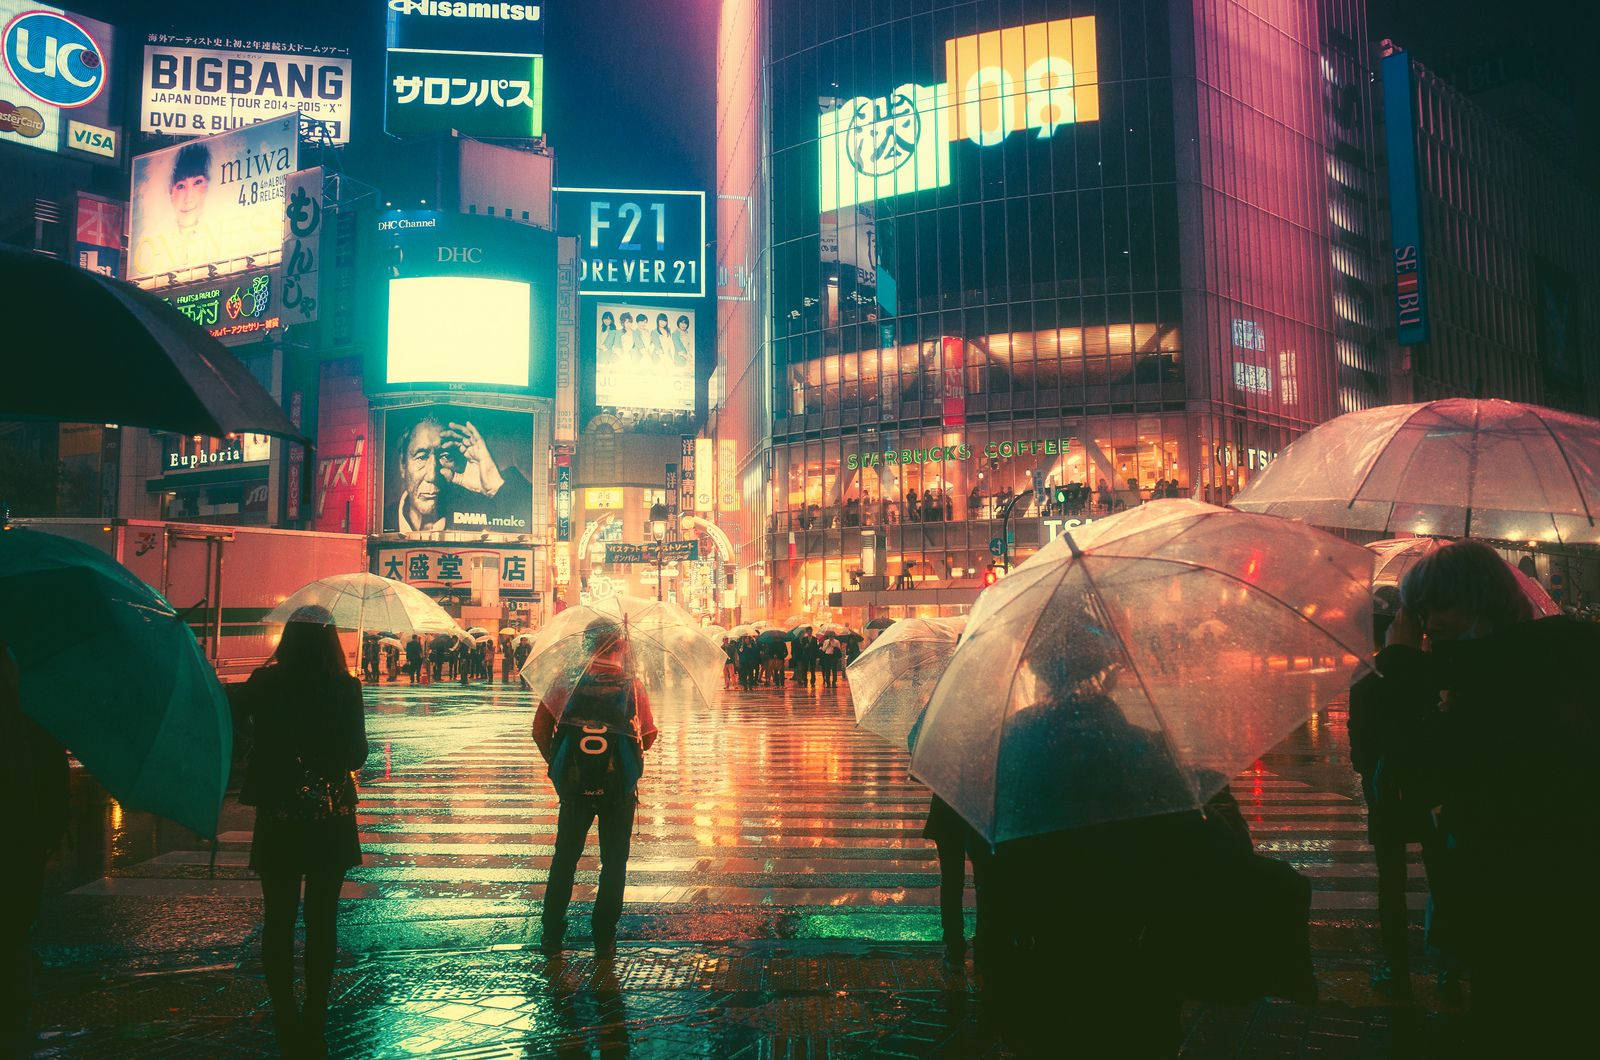 "Cars zooming by as pedestrians cross at the iconic Shibuya Crossing in Tokyo" Wallpaper